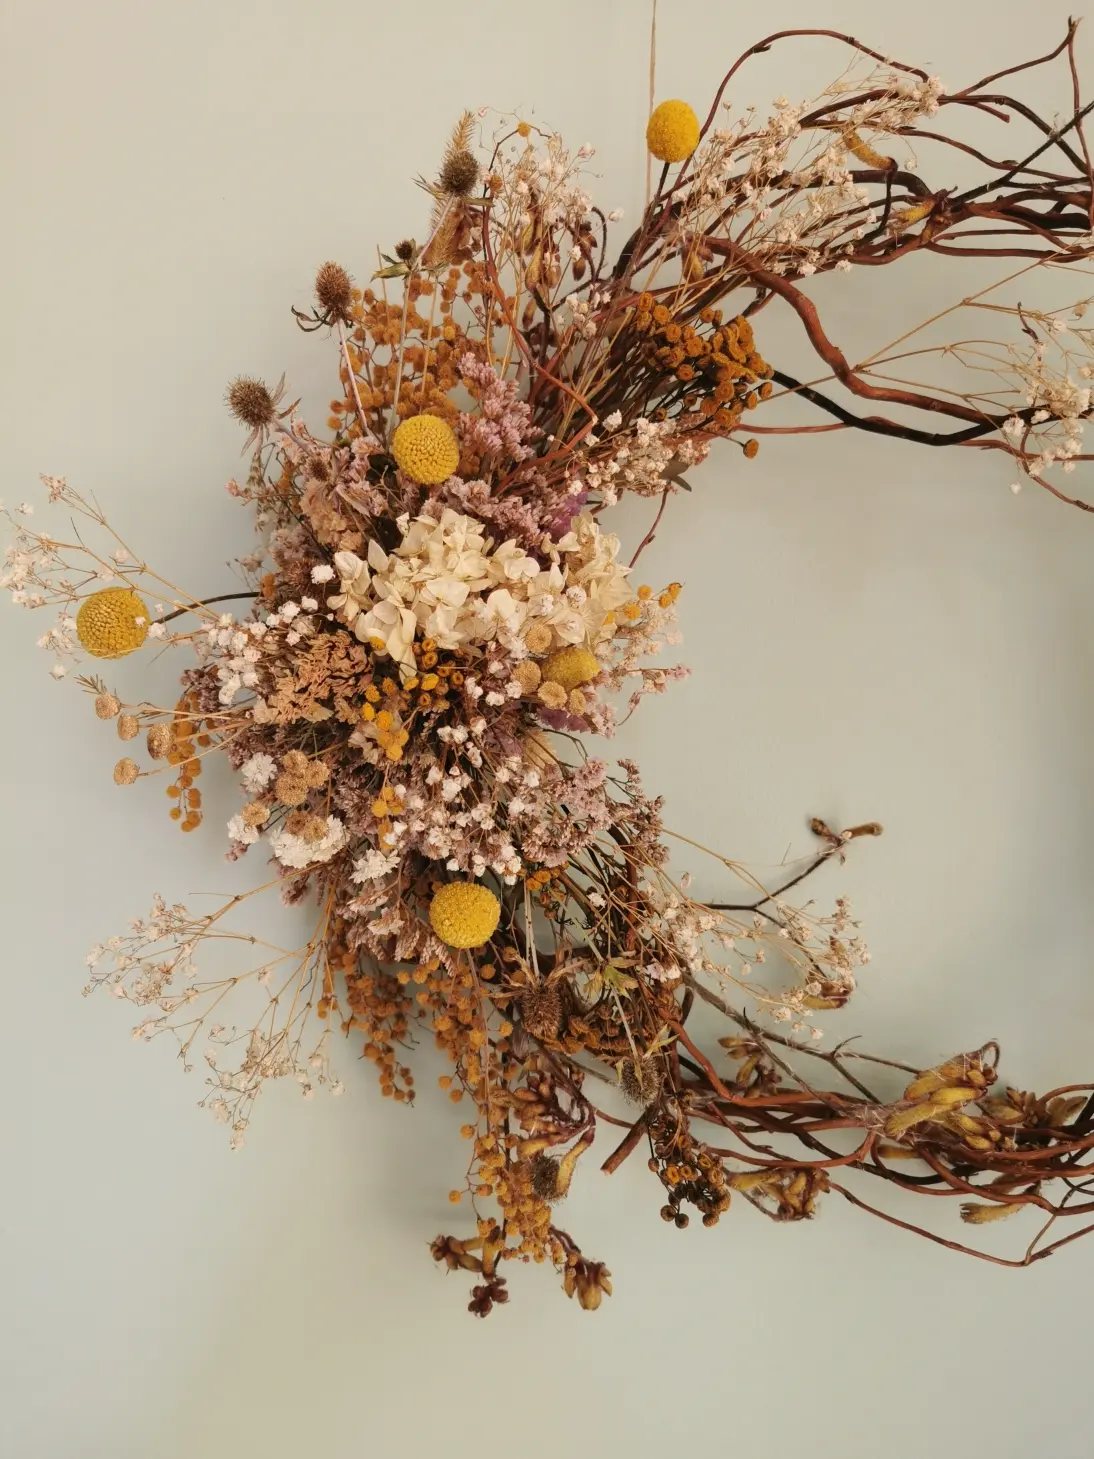 A subtle, space-age proposal for a garland on a wicker hoop with a brooch to the left.